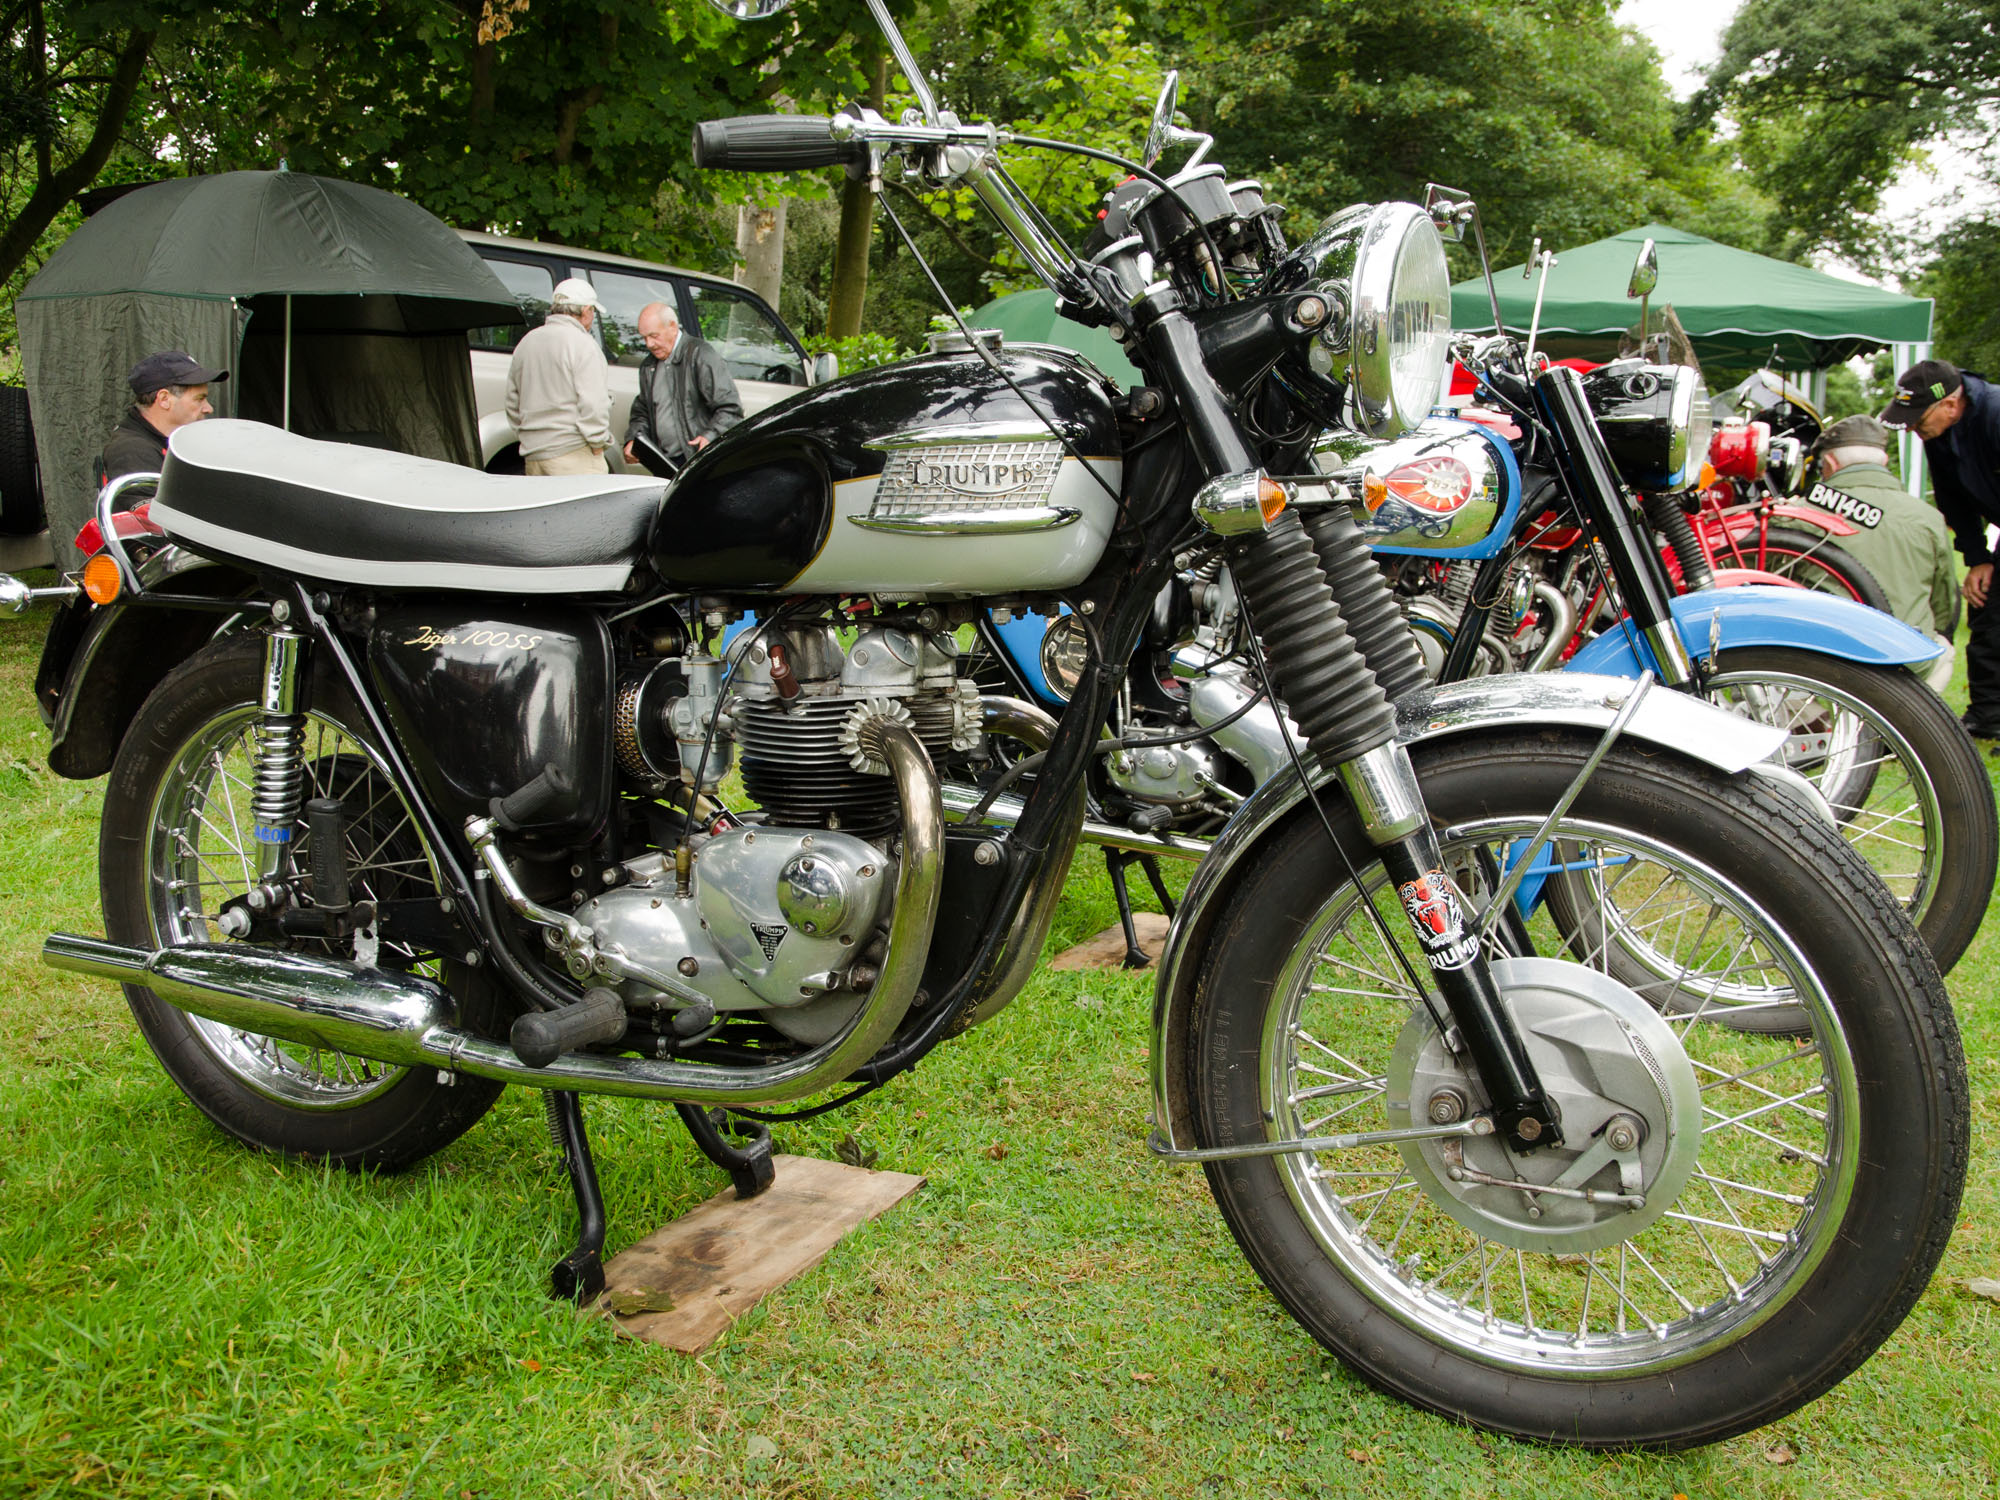 several motorcycles parked in a grassy area with tents in the background